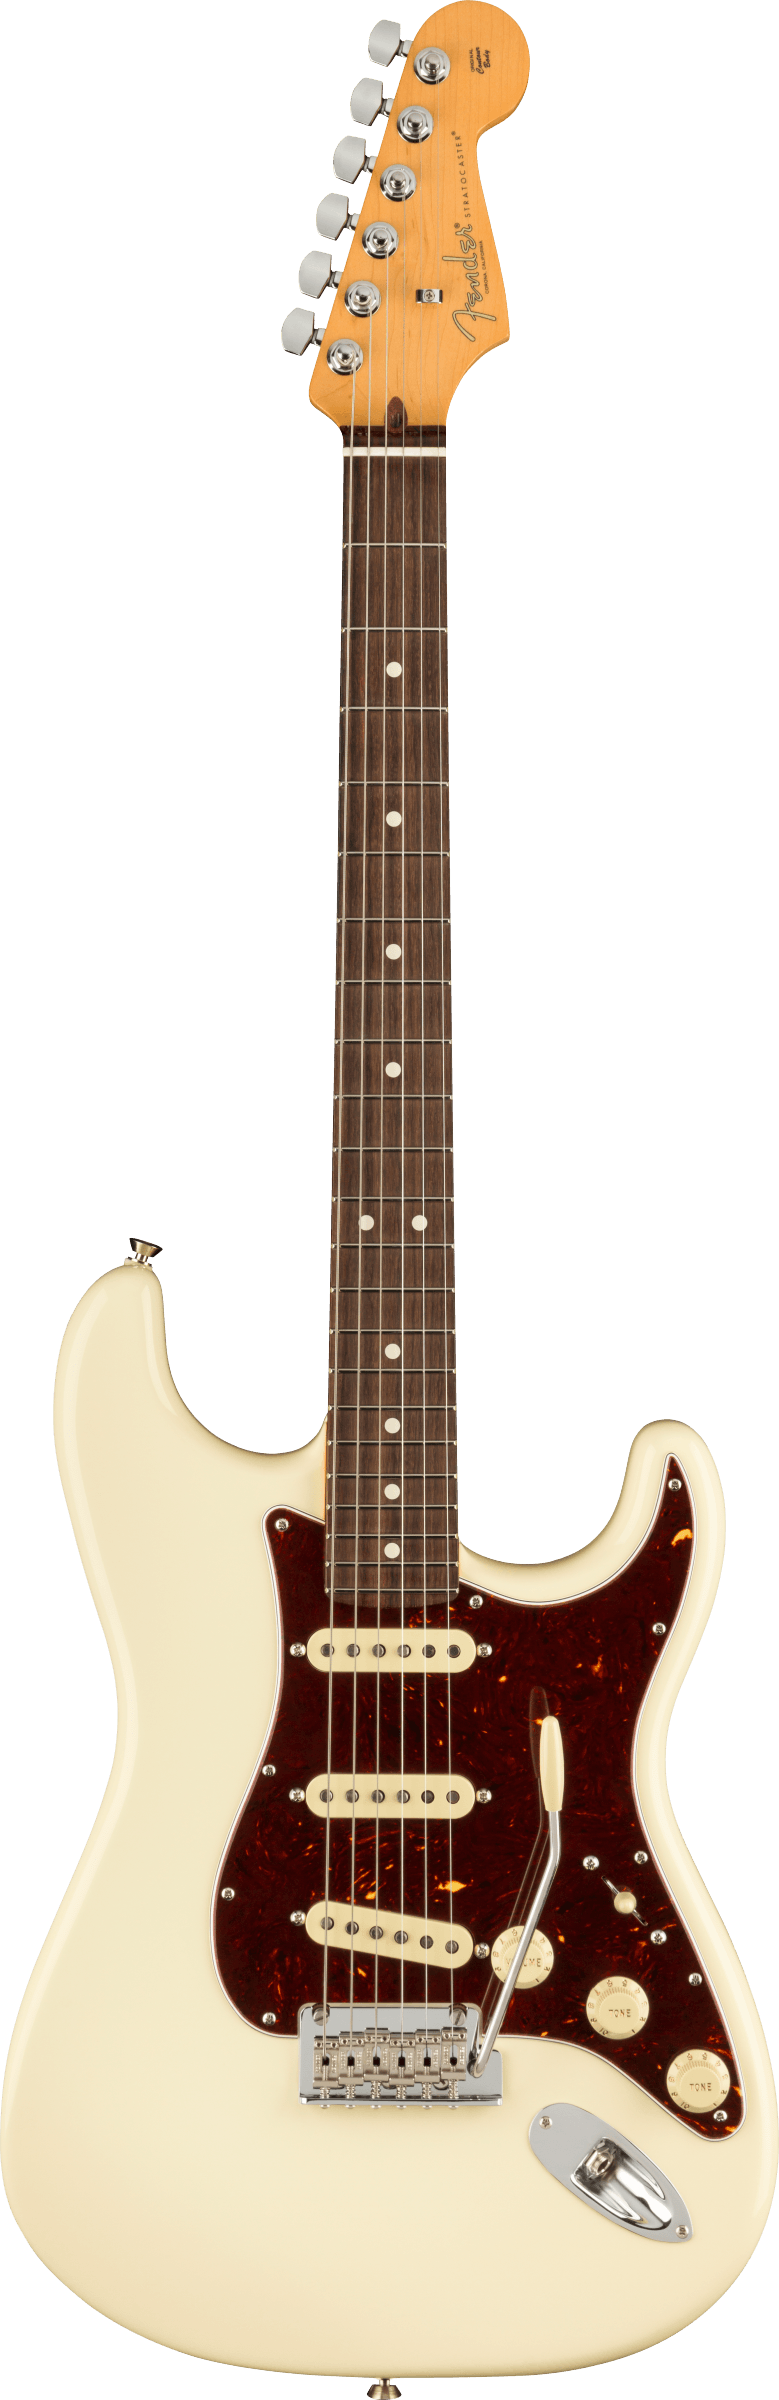 Fender Stratocaster electric guitar in Olympic White Tone Shop Guitars Dallas Texas